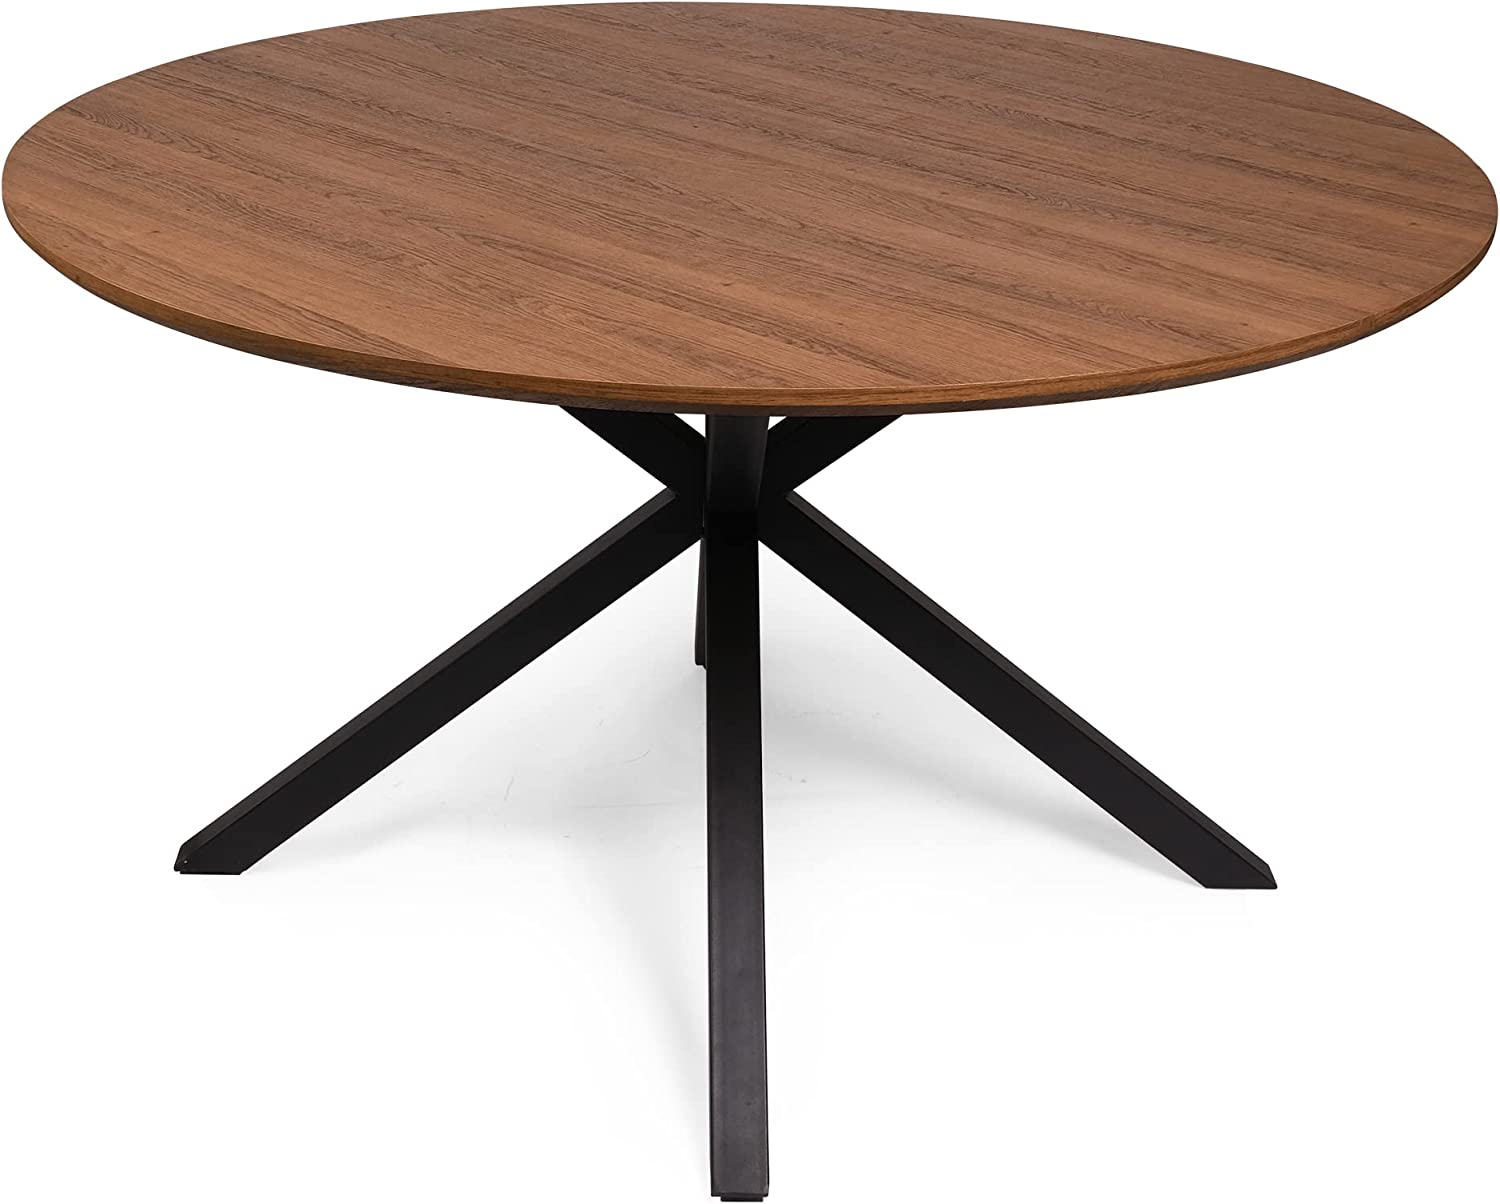 53" Mid-Century Modern Round Dining Room Table for 4-6 Person W/Solid Metal Legs, Walnut